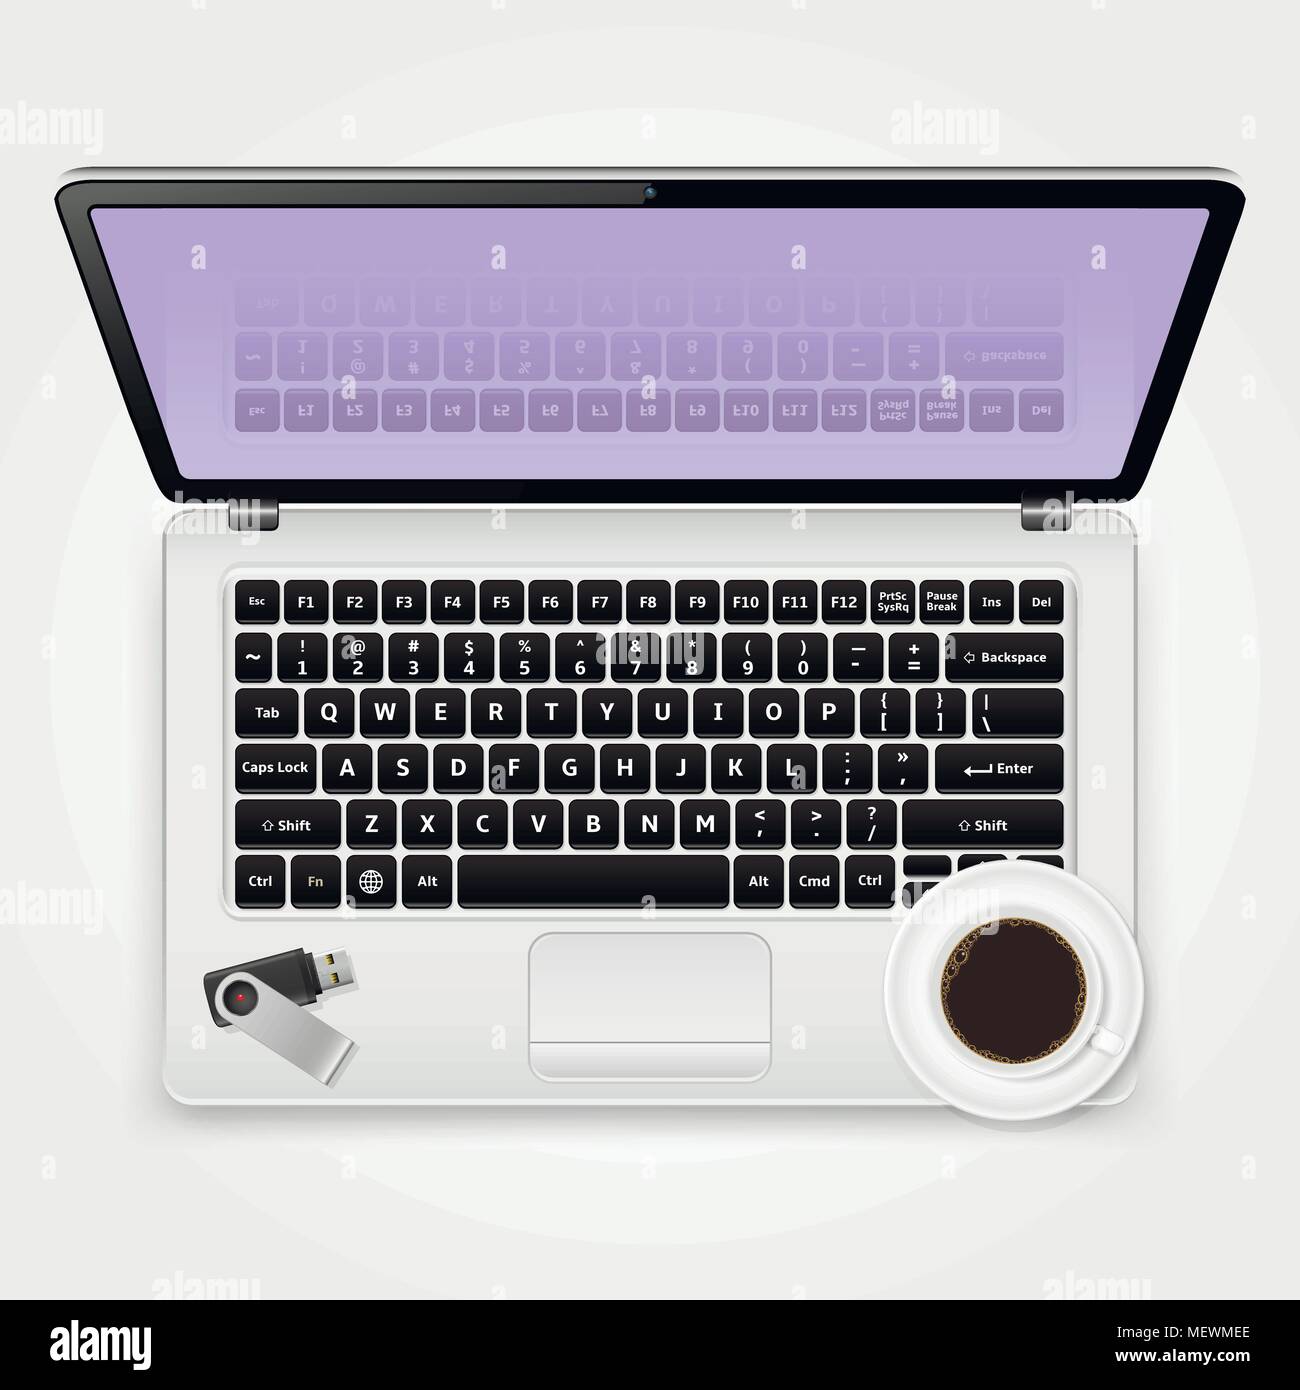 USB flash drive and cup of coffee standing on the laptop. Working at home concept. Vector illustration. Stock Vector